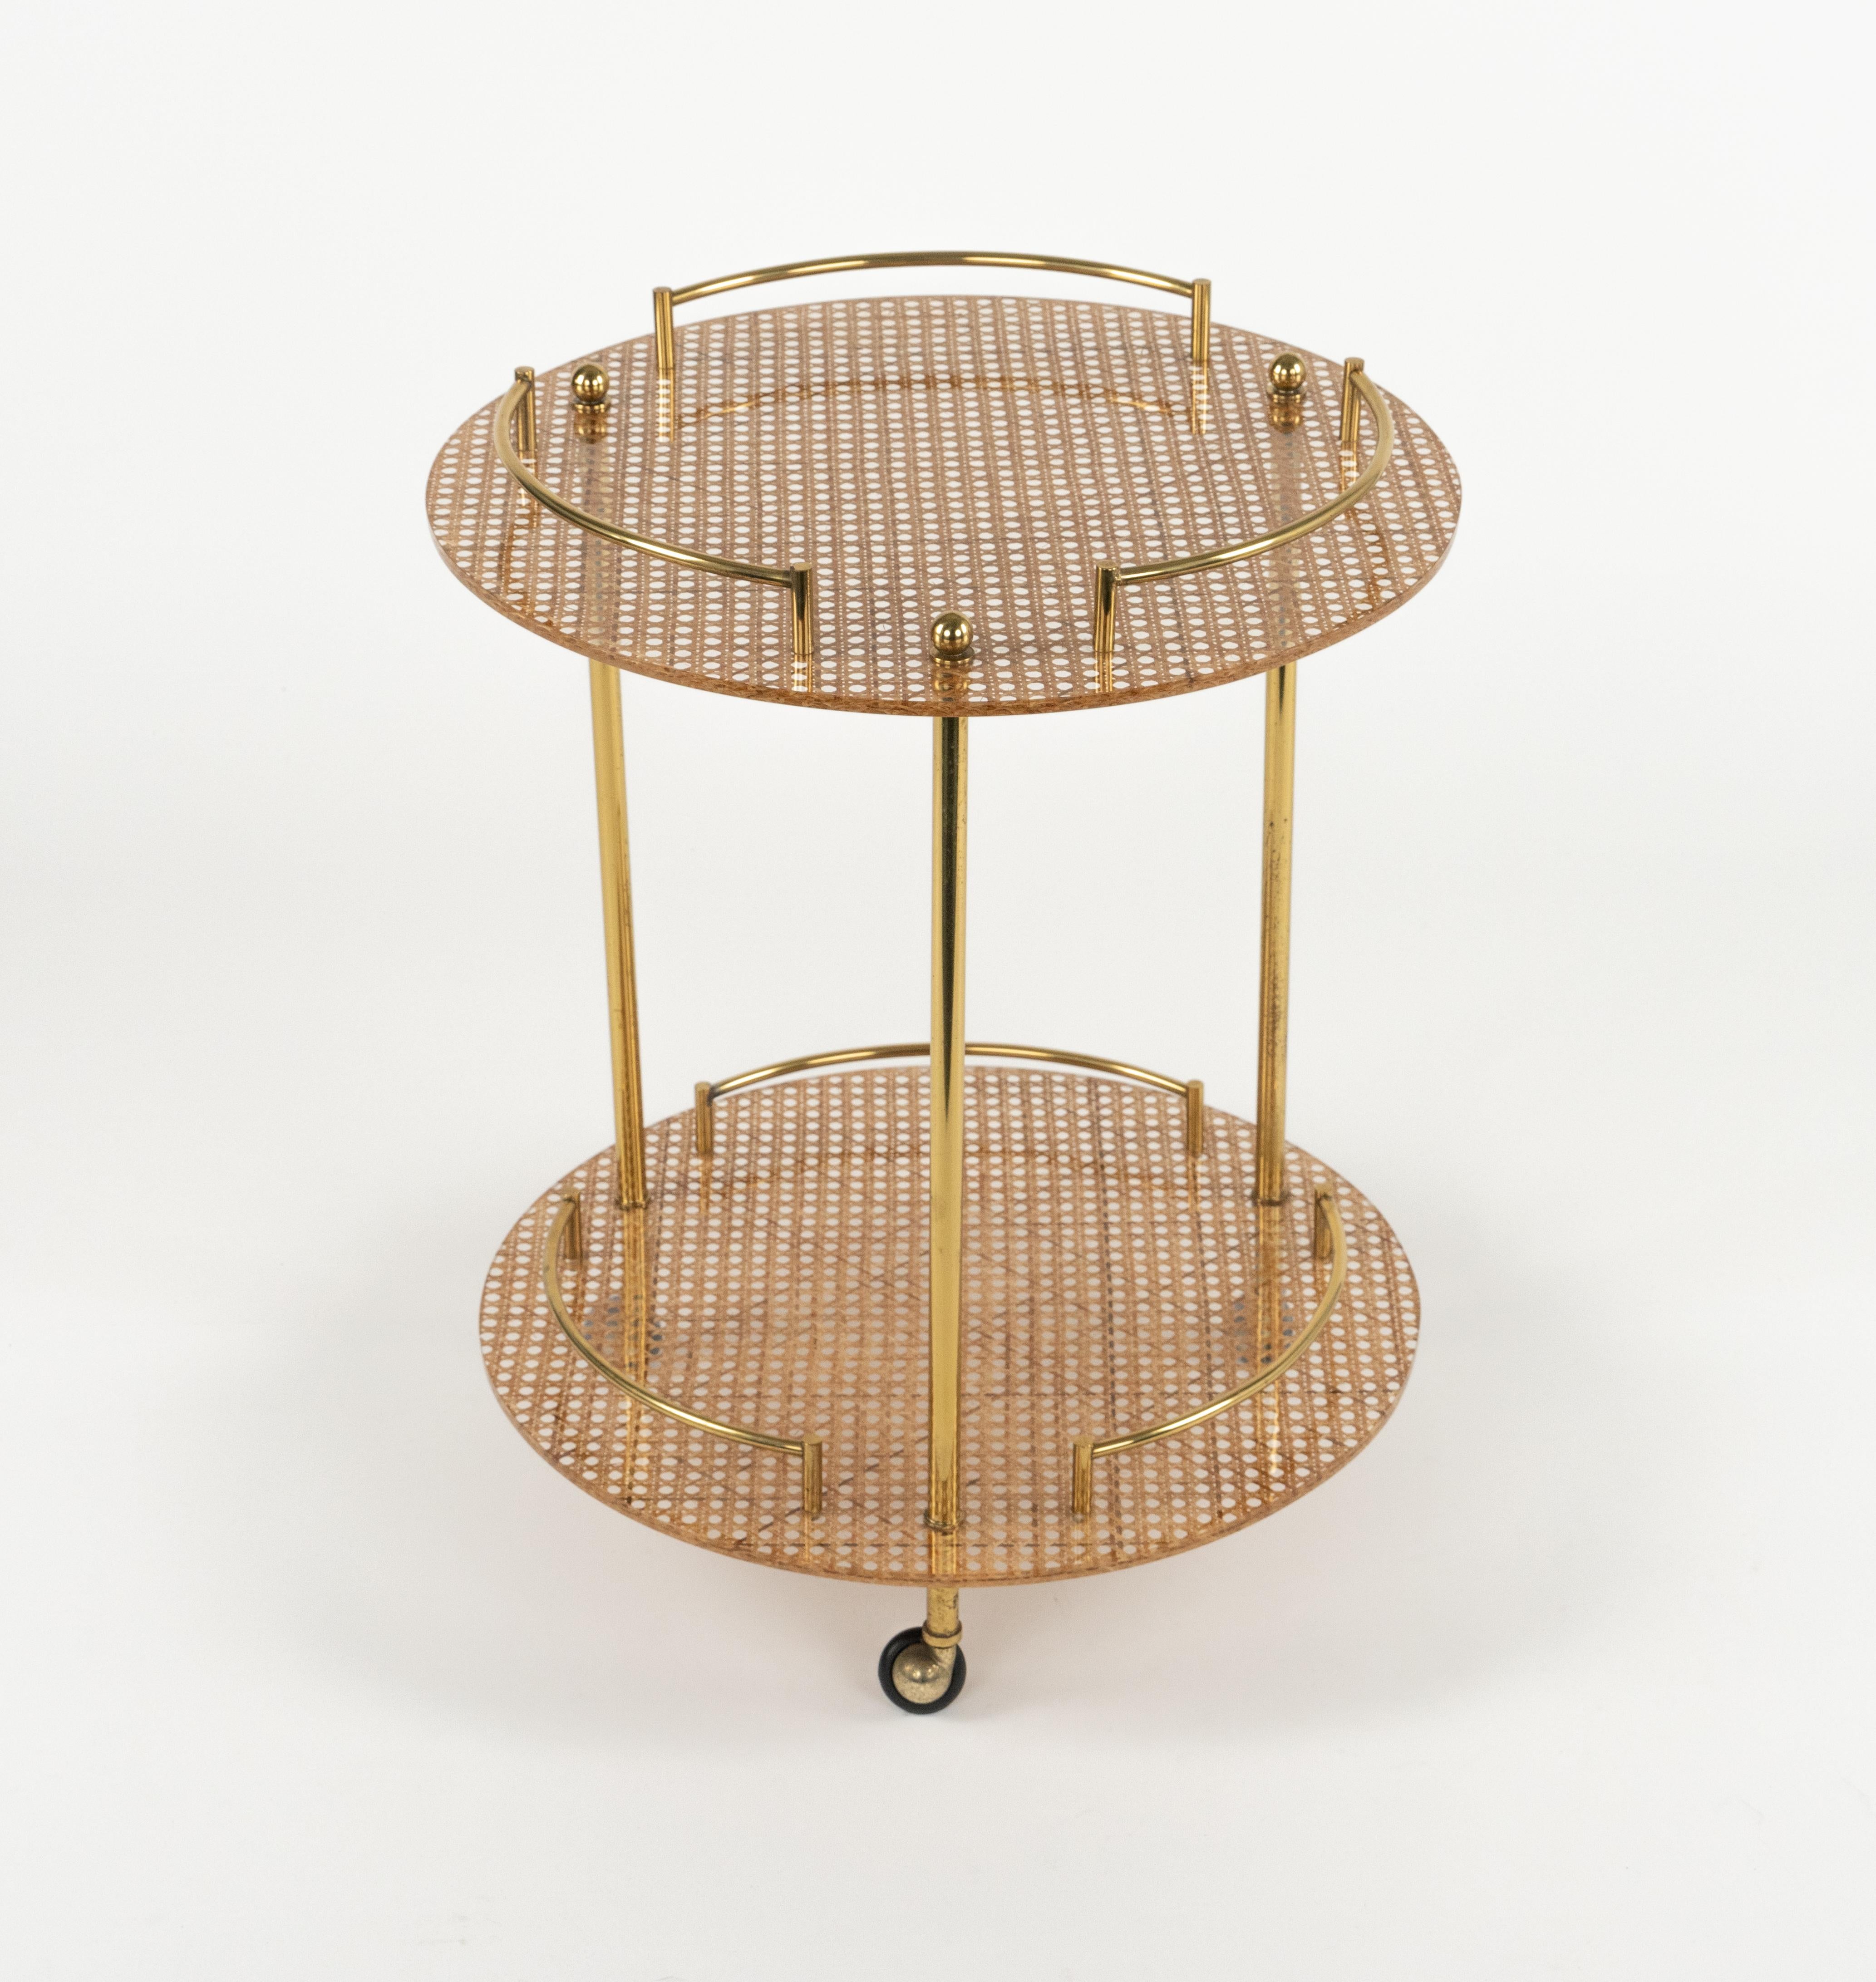 Serving Bar Cart in Lucite, Brass and Rattan Christian Dior Style, Italy 1970s For Sale 1